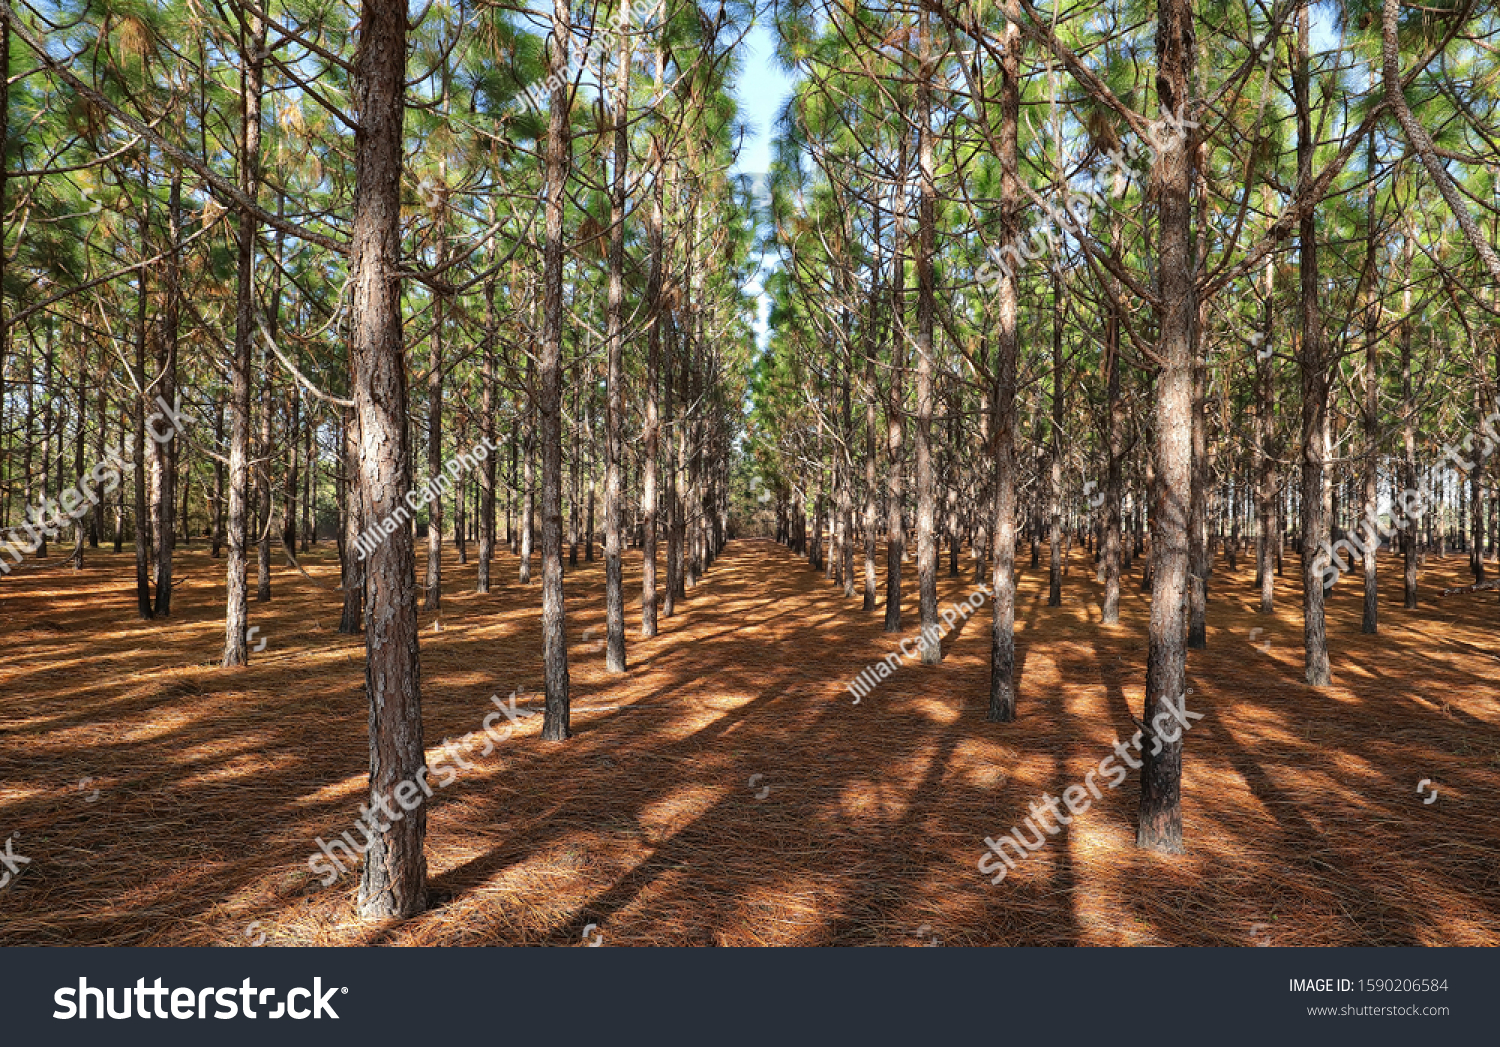 A grove of pine trees planted in a straight line so they grow straighter and taller as a result of direct competition for light. #1590206584